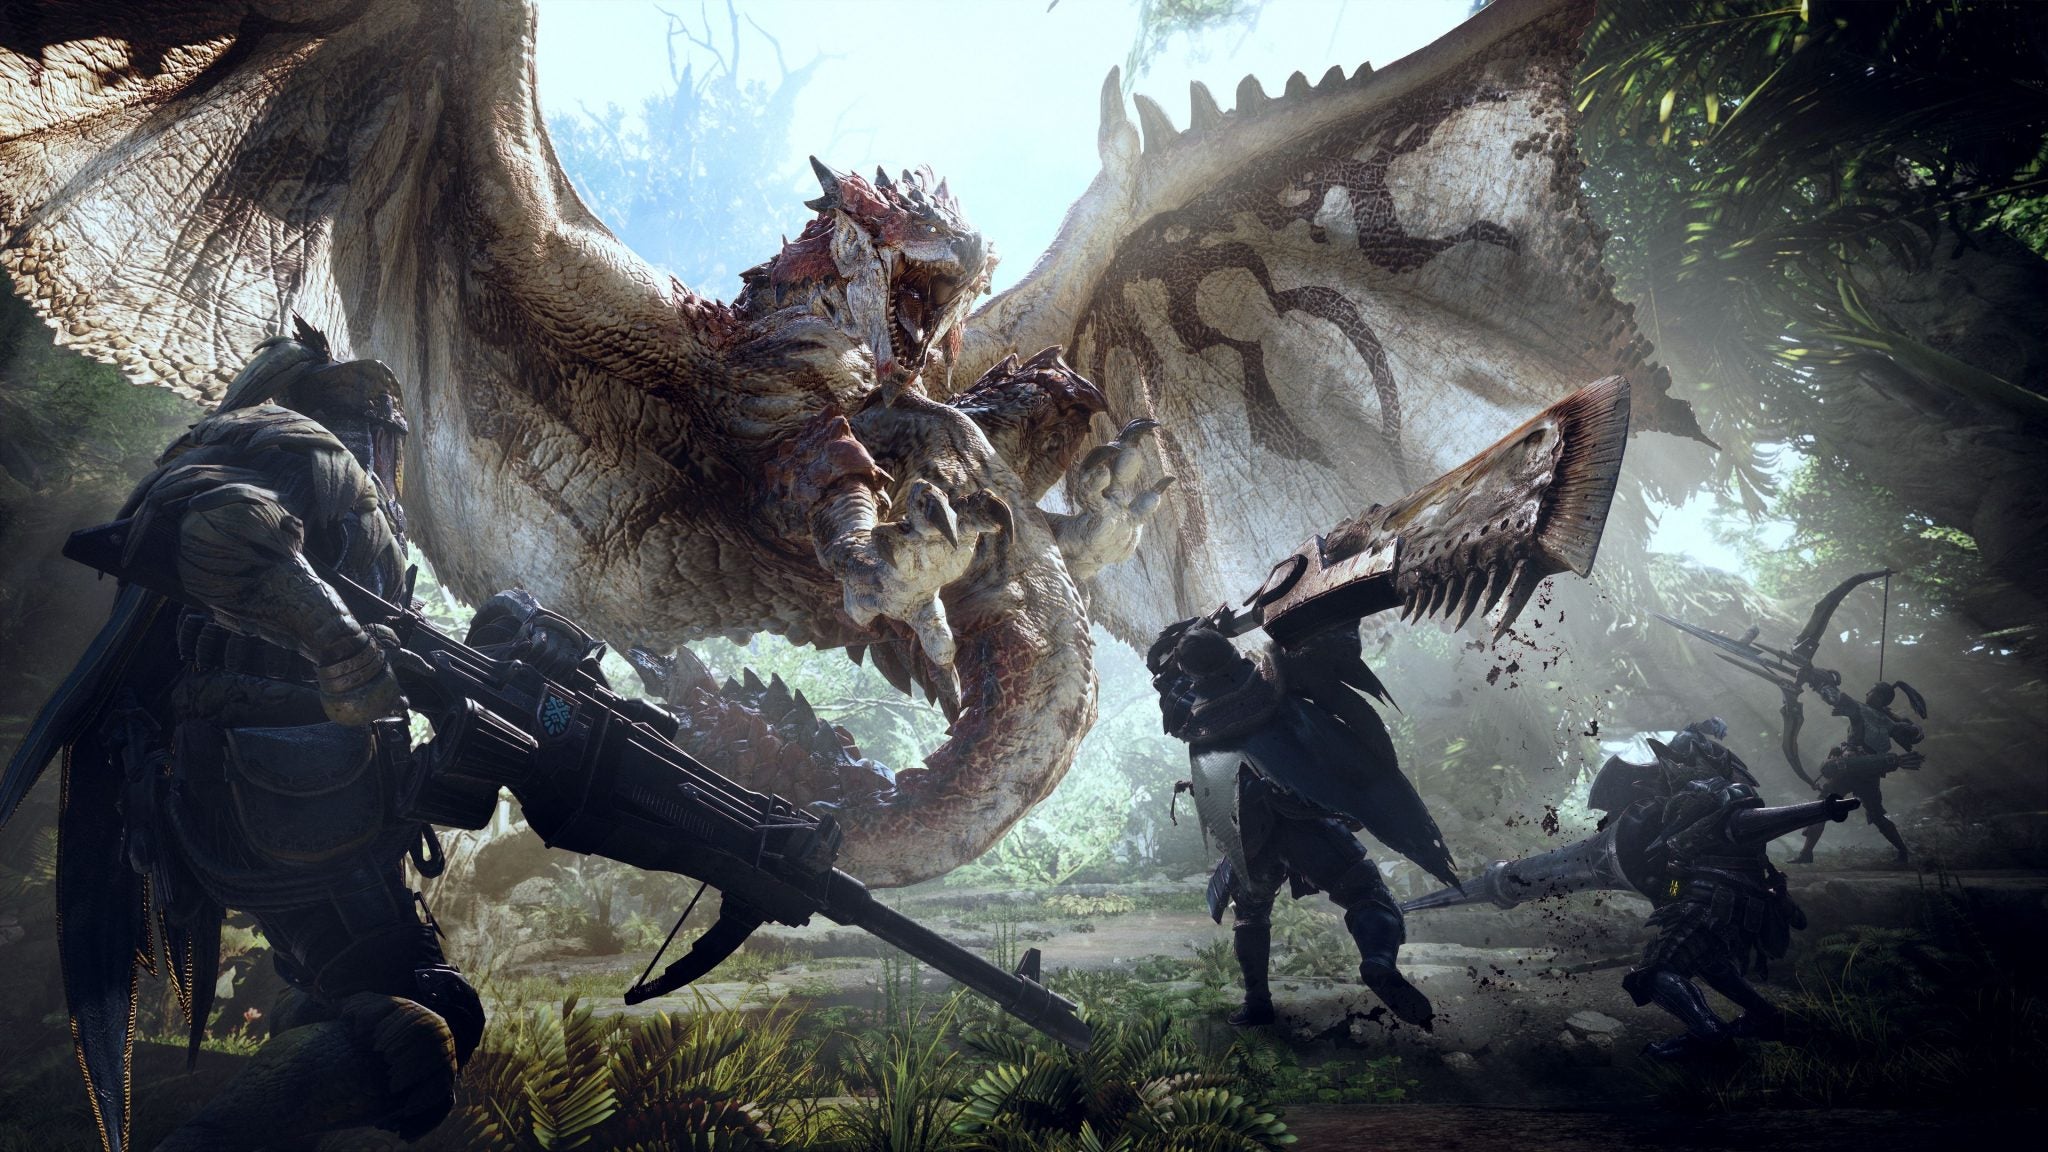 Image for Monster Hunter World is Kind of "Short" With Its 40 to 50 Hour Story Mode